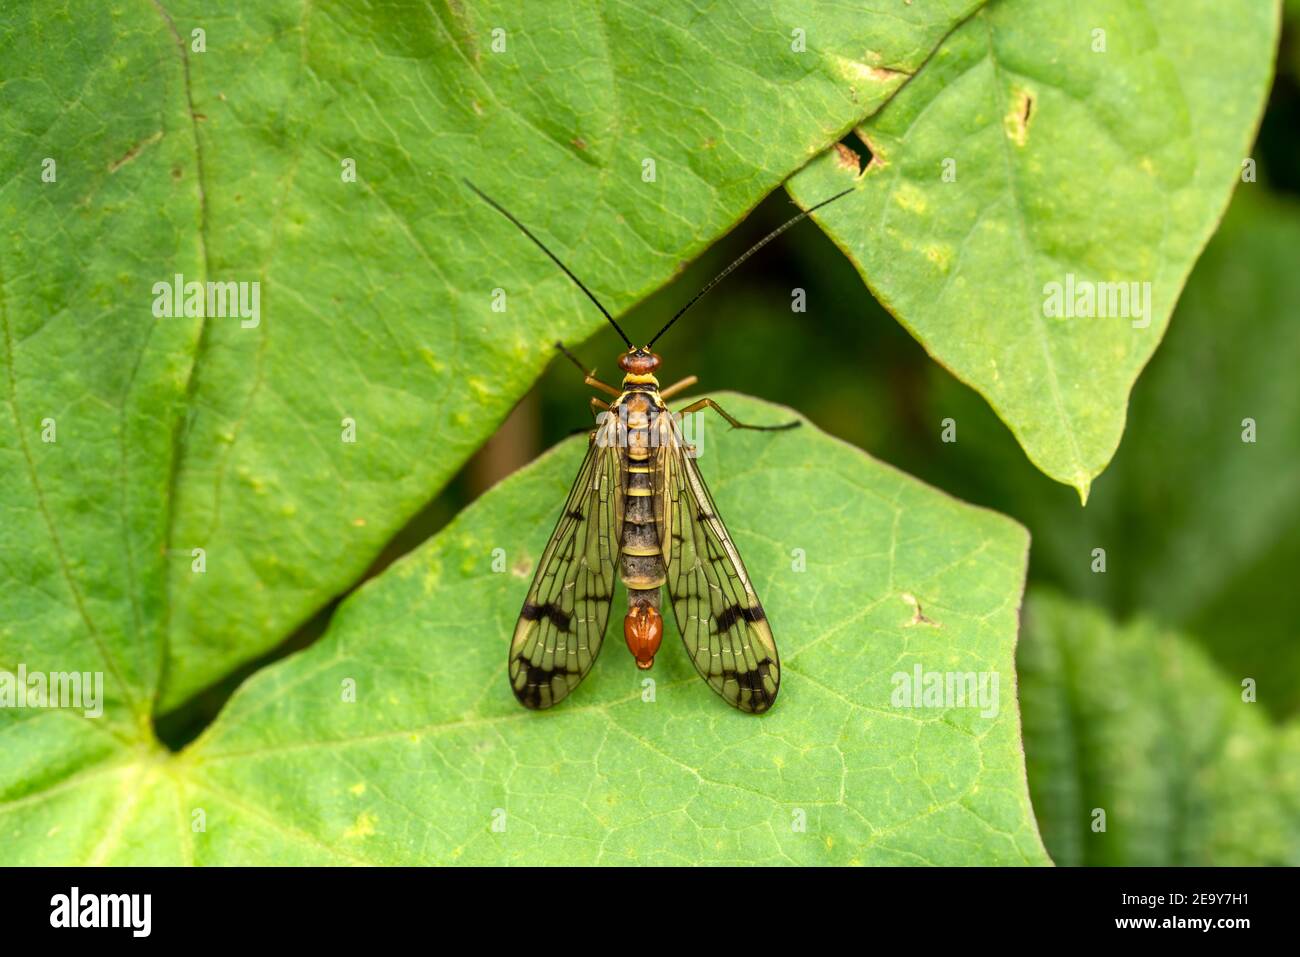 Common Scorpion Fly (Panorpa communis) an abundant harmless insect species found in the UK and Europe stock photo image Stock Photo